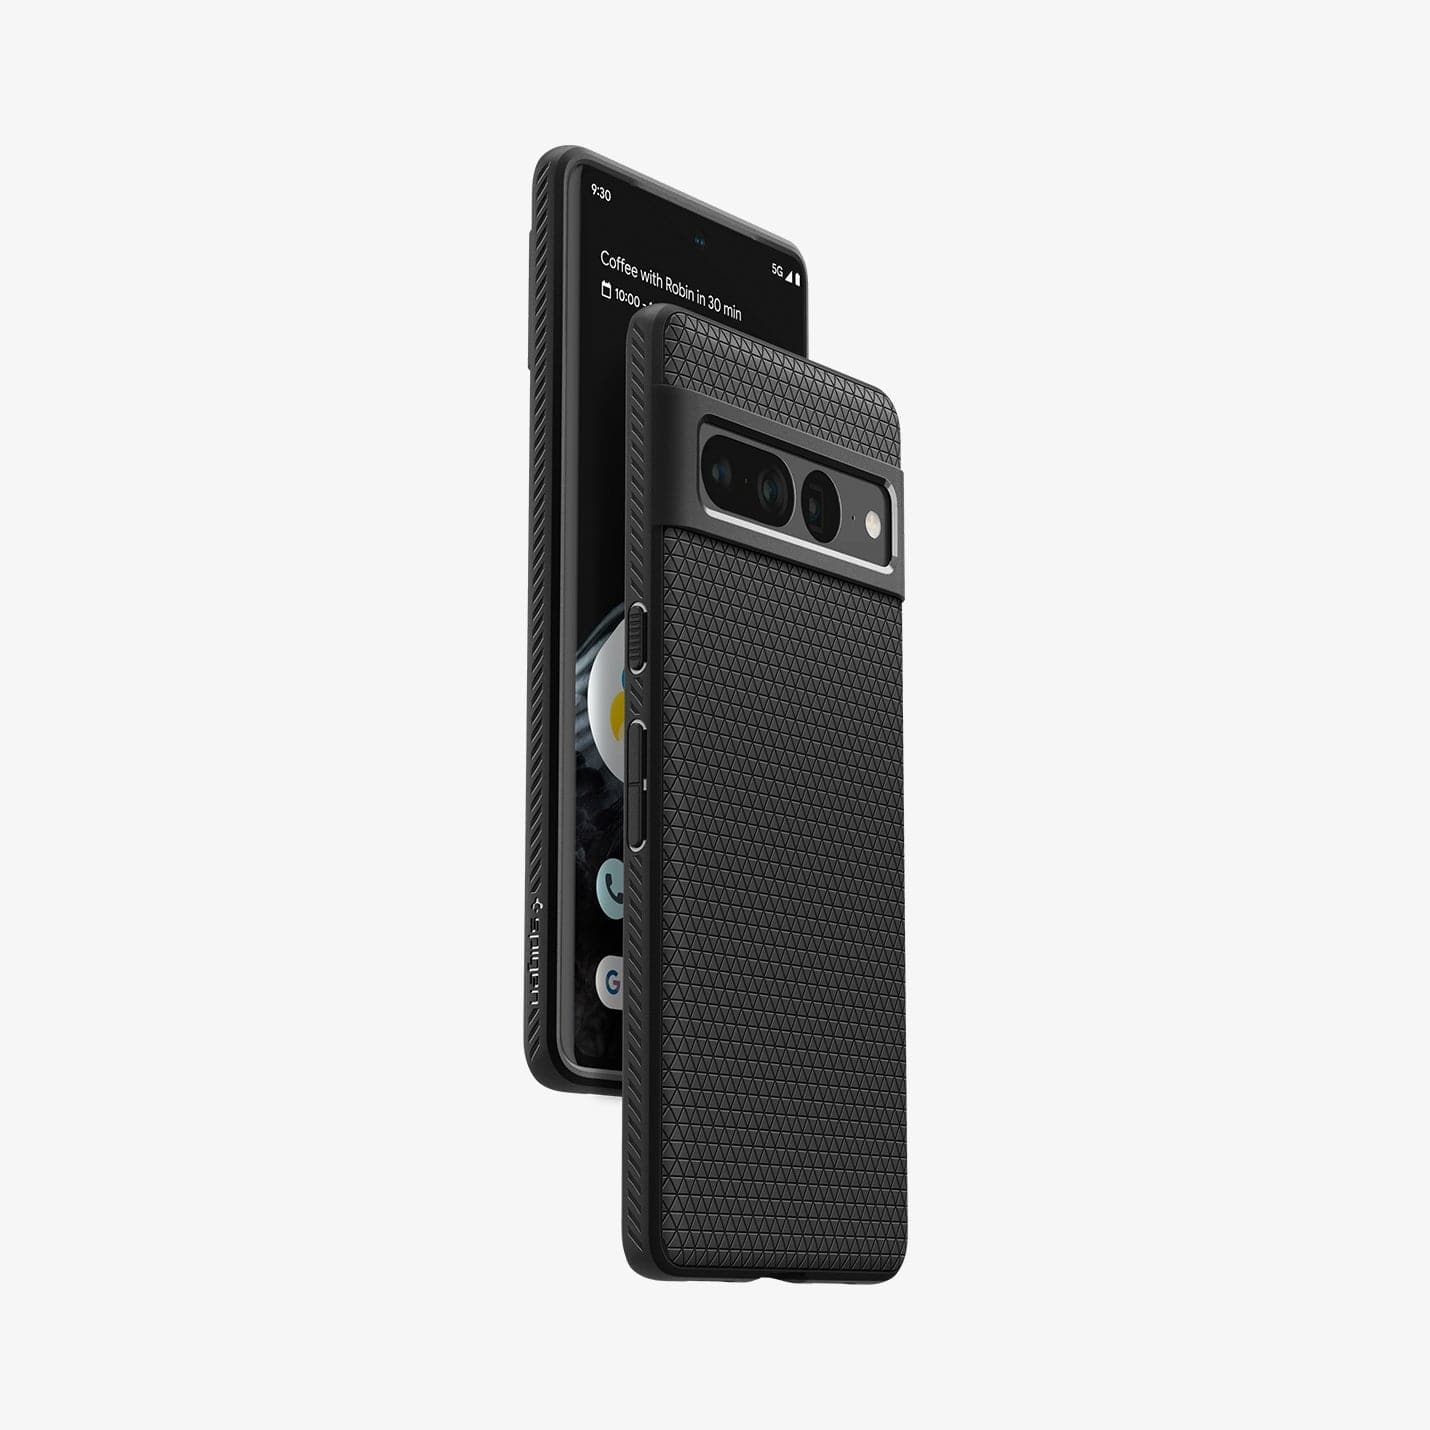 ACS04723 - Pixel 7 Pro Case Liquid Air in matte black showing the back, sides and partial front